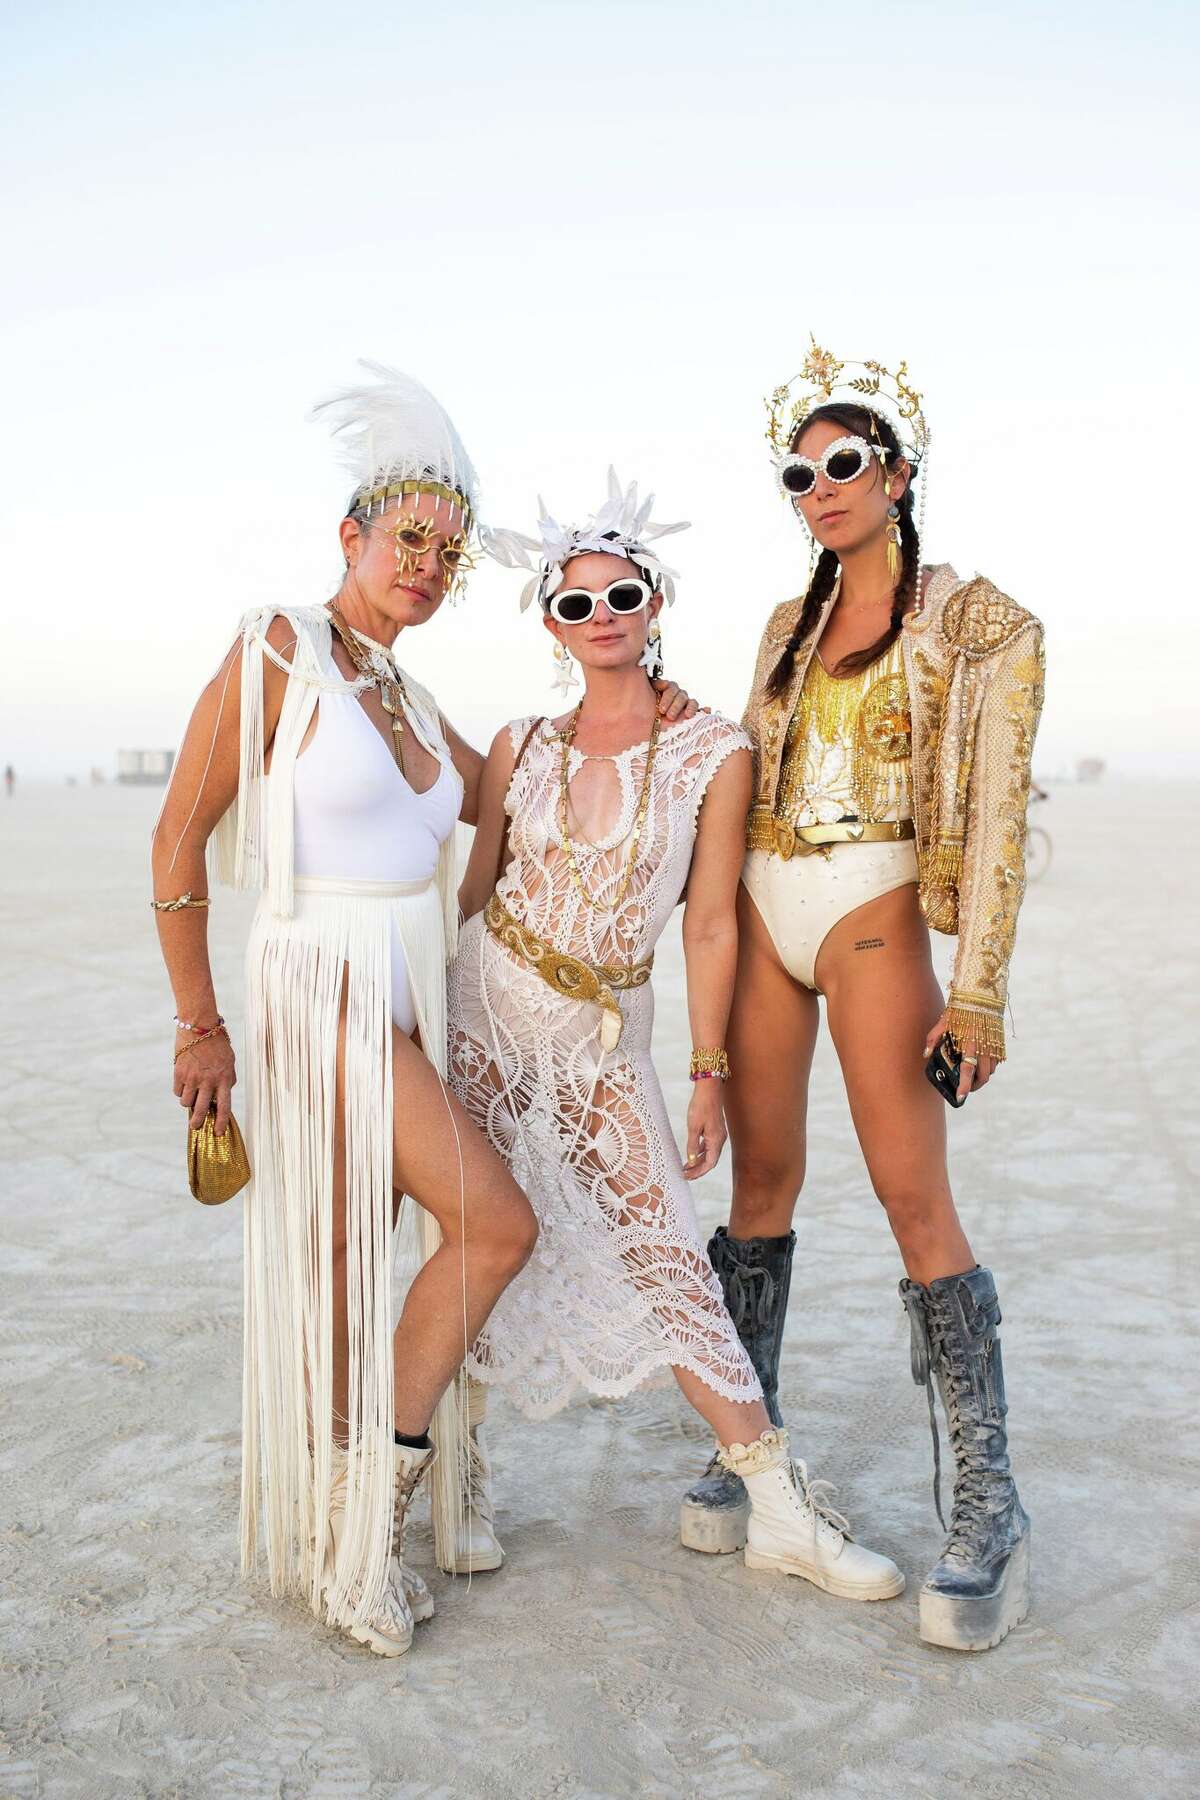 The wildest fashion photos from Burning Man 2022 Concerns